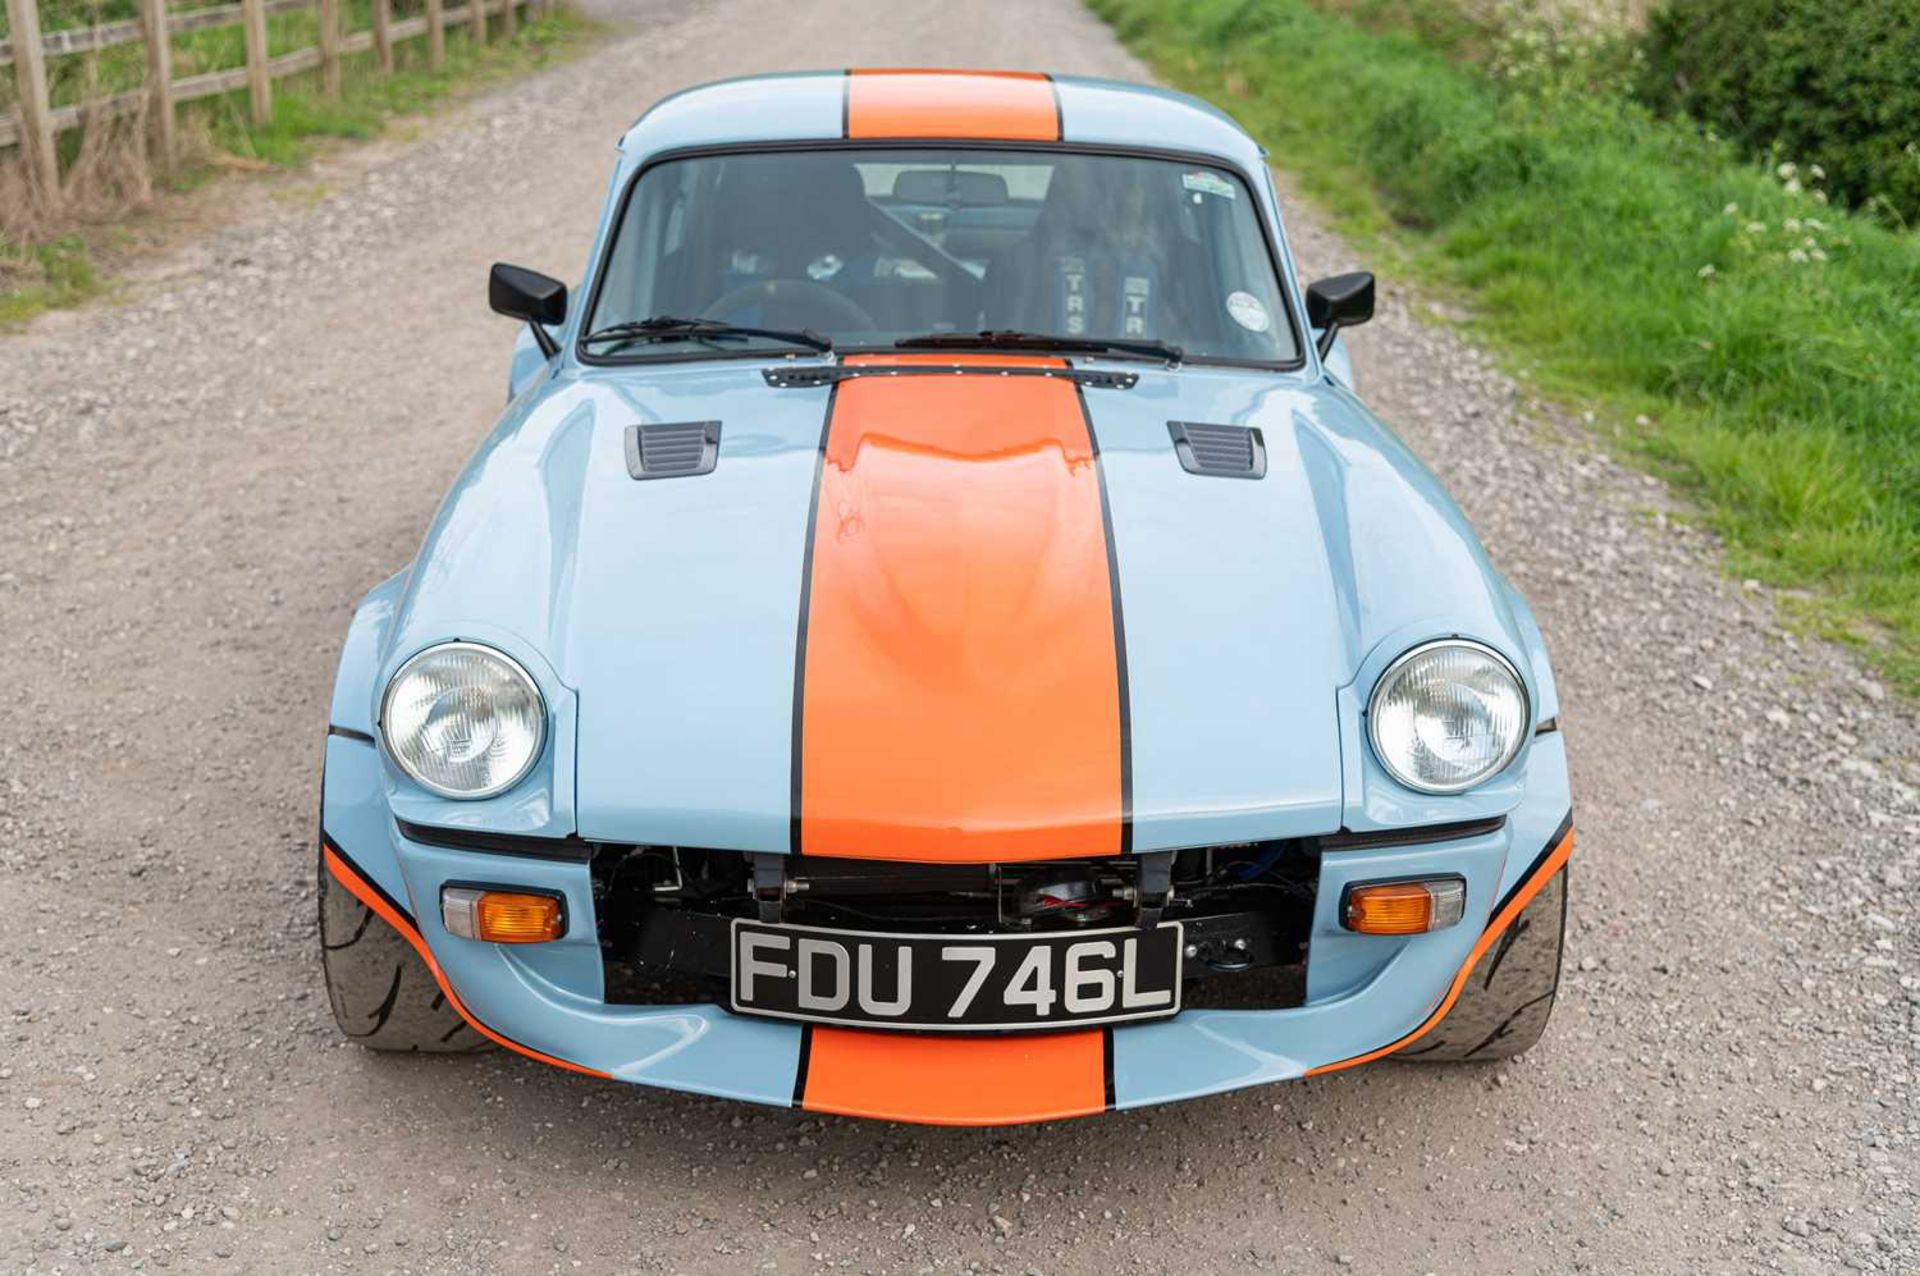 1973 Triumph GT6  ***NO RESERVE*** Presented in Gulf Racing-inspired paintwork, road-going track wea - Bild 2 aus 65